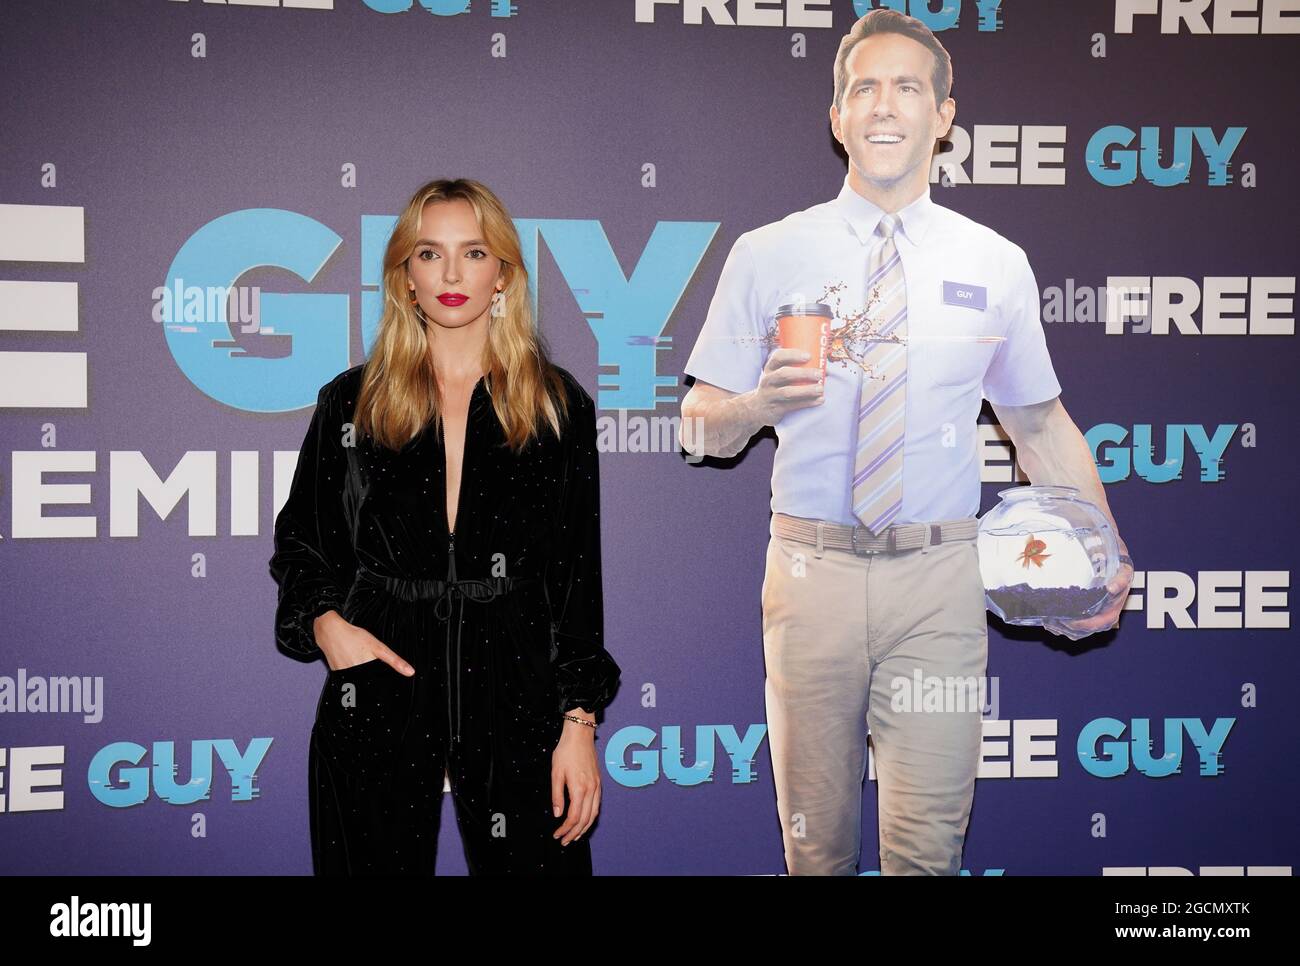 https://c8.alamy.com/comp/2GCMXTK/jodie-comer-alongside-a-cardboard-cutout-of-ryan-reynolds-at-cineworld-leicester-square-central-london-for-the-premiere-of-free-guy-picture-date-monday-august-9-2021-2GCMXTK.jpg